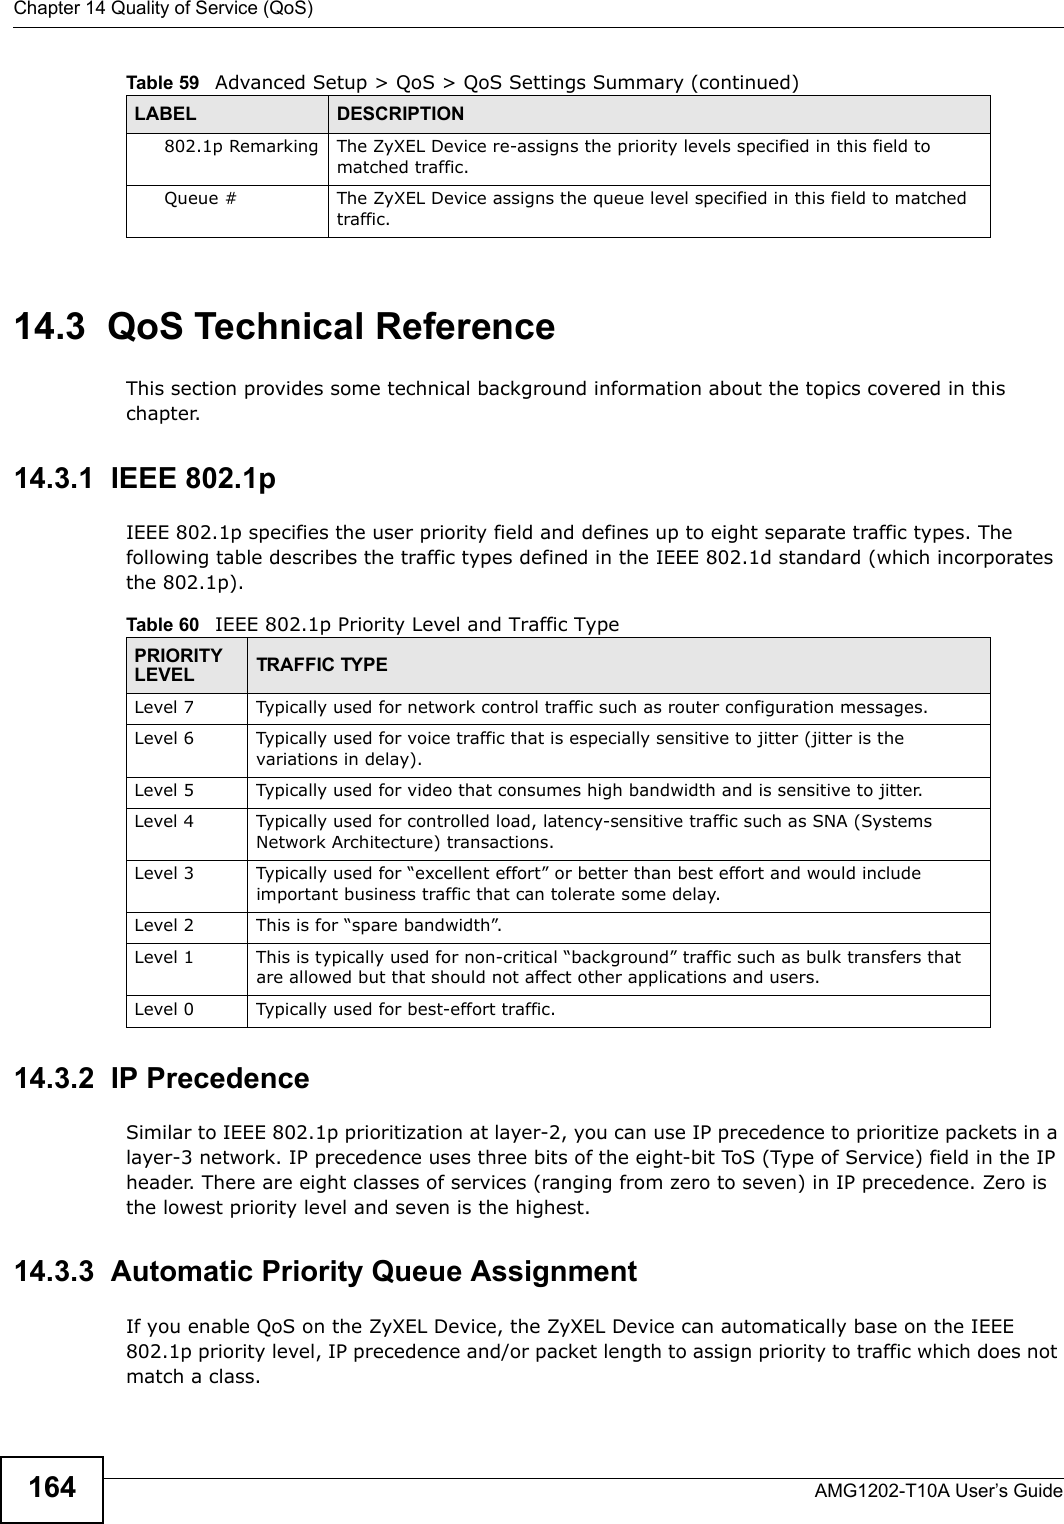 Chapter 14 Quality of Service (QoS)AMG1202-T10A User’s Guide16414.3  QoS Technical ReferenceThis section provides some technical background information about the topics covered in this chapter.14.3.1  IEEE 802.1pIEEE 802.1p specifies the user priority field and defines up to eight separate traffic types. The following table describes the traffic types defined in the IEEE 802.1d standard (which incorporates the 802.1p). 14.3.2  IP PrecedenceSimilar to IEEE 802.1p prioritization at layer-2, you can use IP precedence to prioritize packets in a layer-3 network. IP precedence uses three bits of the eight-bit ToS (Type of Service) field in the IP header. There are eight classes of services (ranging from zero to seven) in IP precedence. Zero is the lowest priority level and seven is the highest.14.3.3  Automatic Priority Queue AssignmentIf you enable QoS on the ZyXEL Device, the ZyXEL Device can automatically base on the IEEE 802.1p priority level, IP precedence and/or packet length to assign priority to traffic which does not match a class.802.1p Remarking The ZyXEL Device re-assigns the priority levels specified in this field to matched traffic.Queue # The ZyXEL Device assigns the queue level specified in this field to matched traffic.Table 59   Advanced Setup &gt; QoS &gt; QoS Settings Summary (continued)LABEL DESCRIPTIONTable 60   IEEE 802.1p Priority Level and Traffic TypePRIORITY LEVEL TRAFFIC TYPELevel 7 Typically used for network control traffic such as router configuration messages.Level 6 Typically used for voice traffic that is especially sensitive to jitter (jitter is the variations in delay).Level 5 Typically used for video that consumes high bandwidth and is sensitive to jitter.Level 4 Typically used for controlled load, latency-sensitive traffic such as SNA (Systems Network Architecture) transactions.Level 3 Typically used for “excellent effort” or better than best effort and would include important business traffic that can tolerate some delay.Level 2 This is for “spare bandwidth”. Level 1 This is typically used for non-critical “background” traffic such as bulk transfers that are allowed but that should not affect other applications and users. Level 0 Typically used for best-effort traffic.